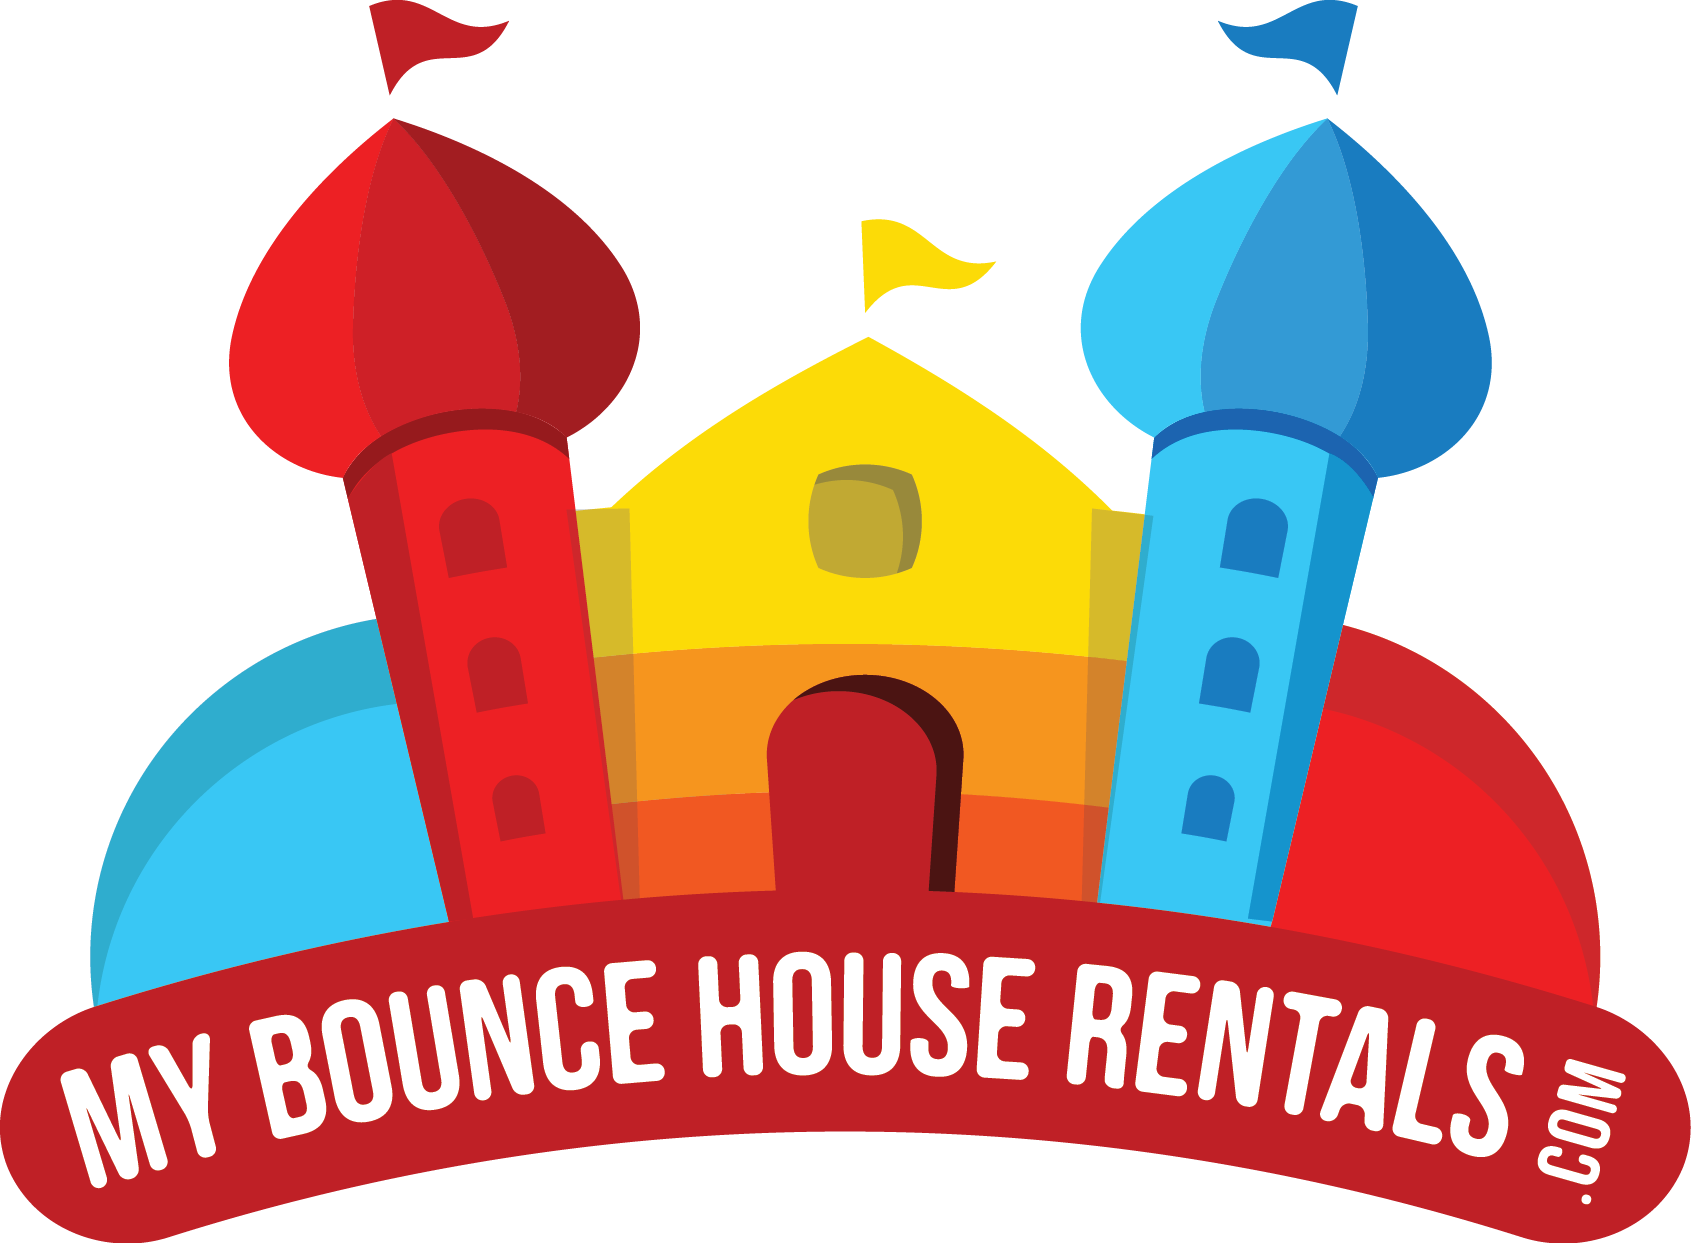 My bounce house rentals of Scottsdale's Logo